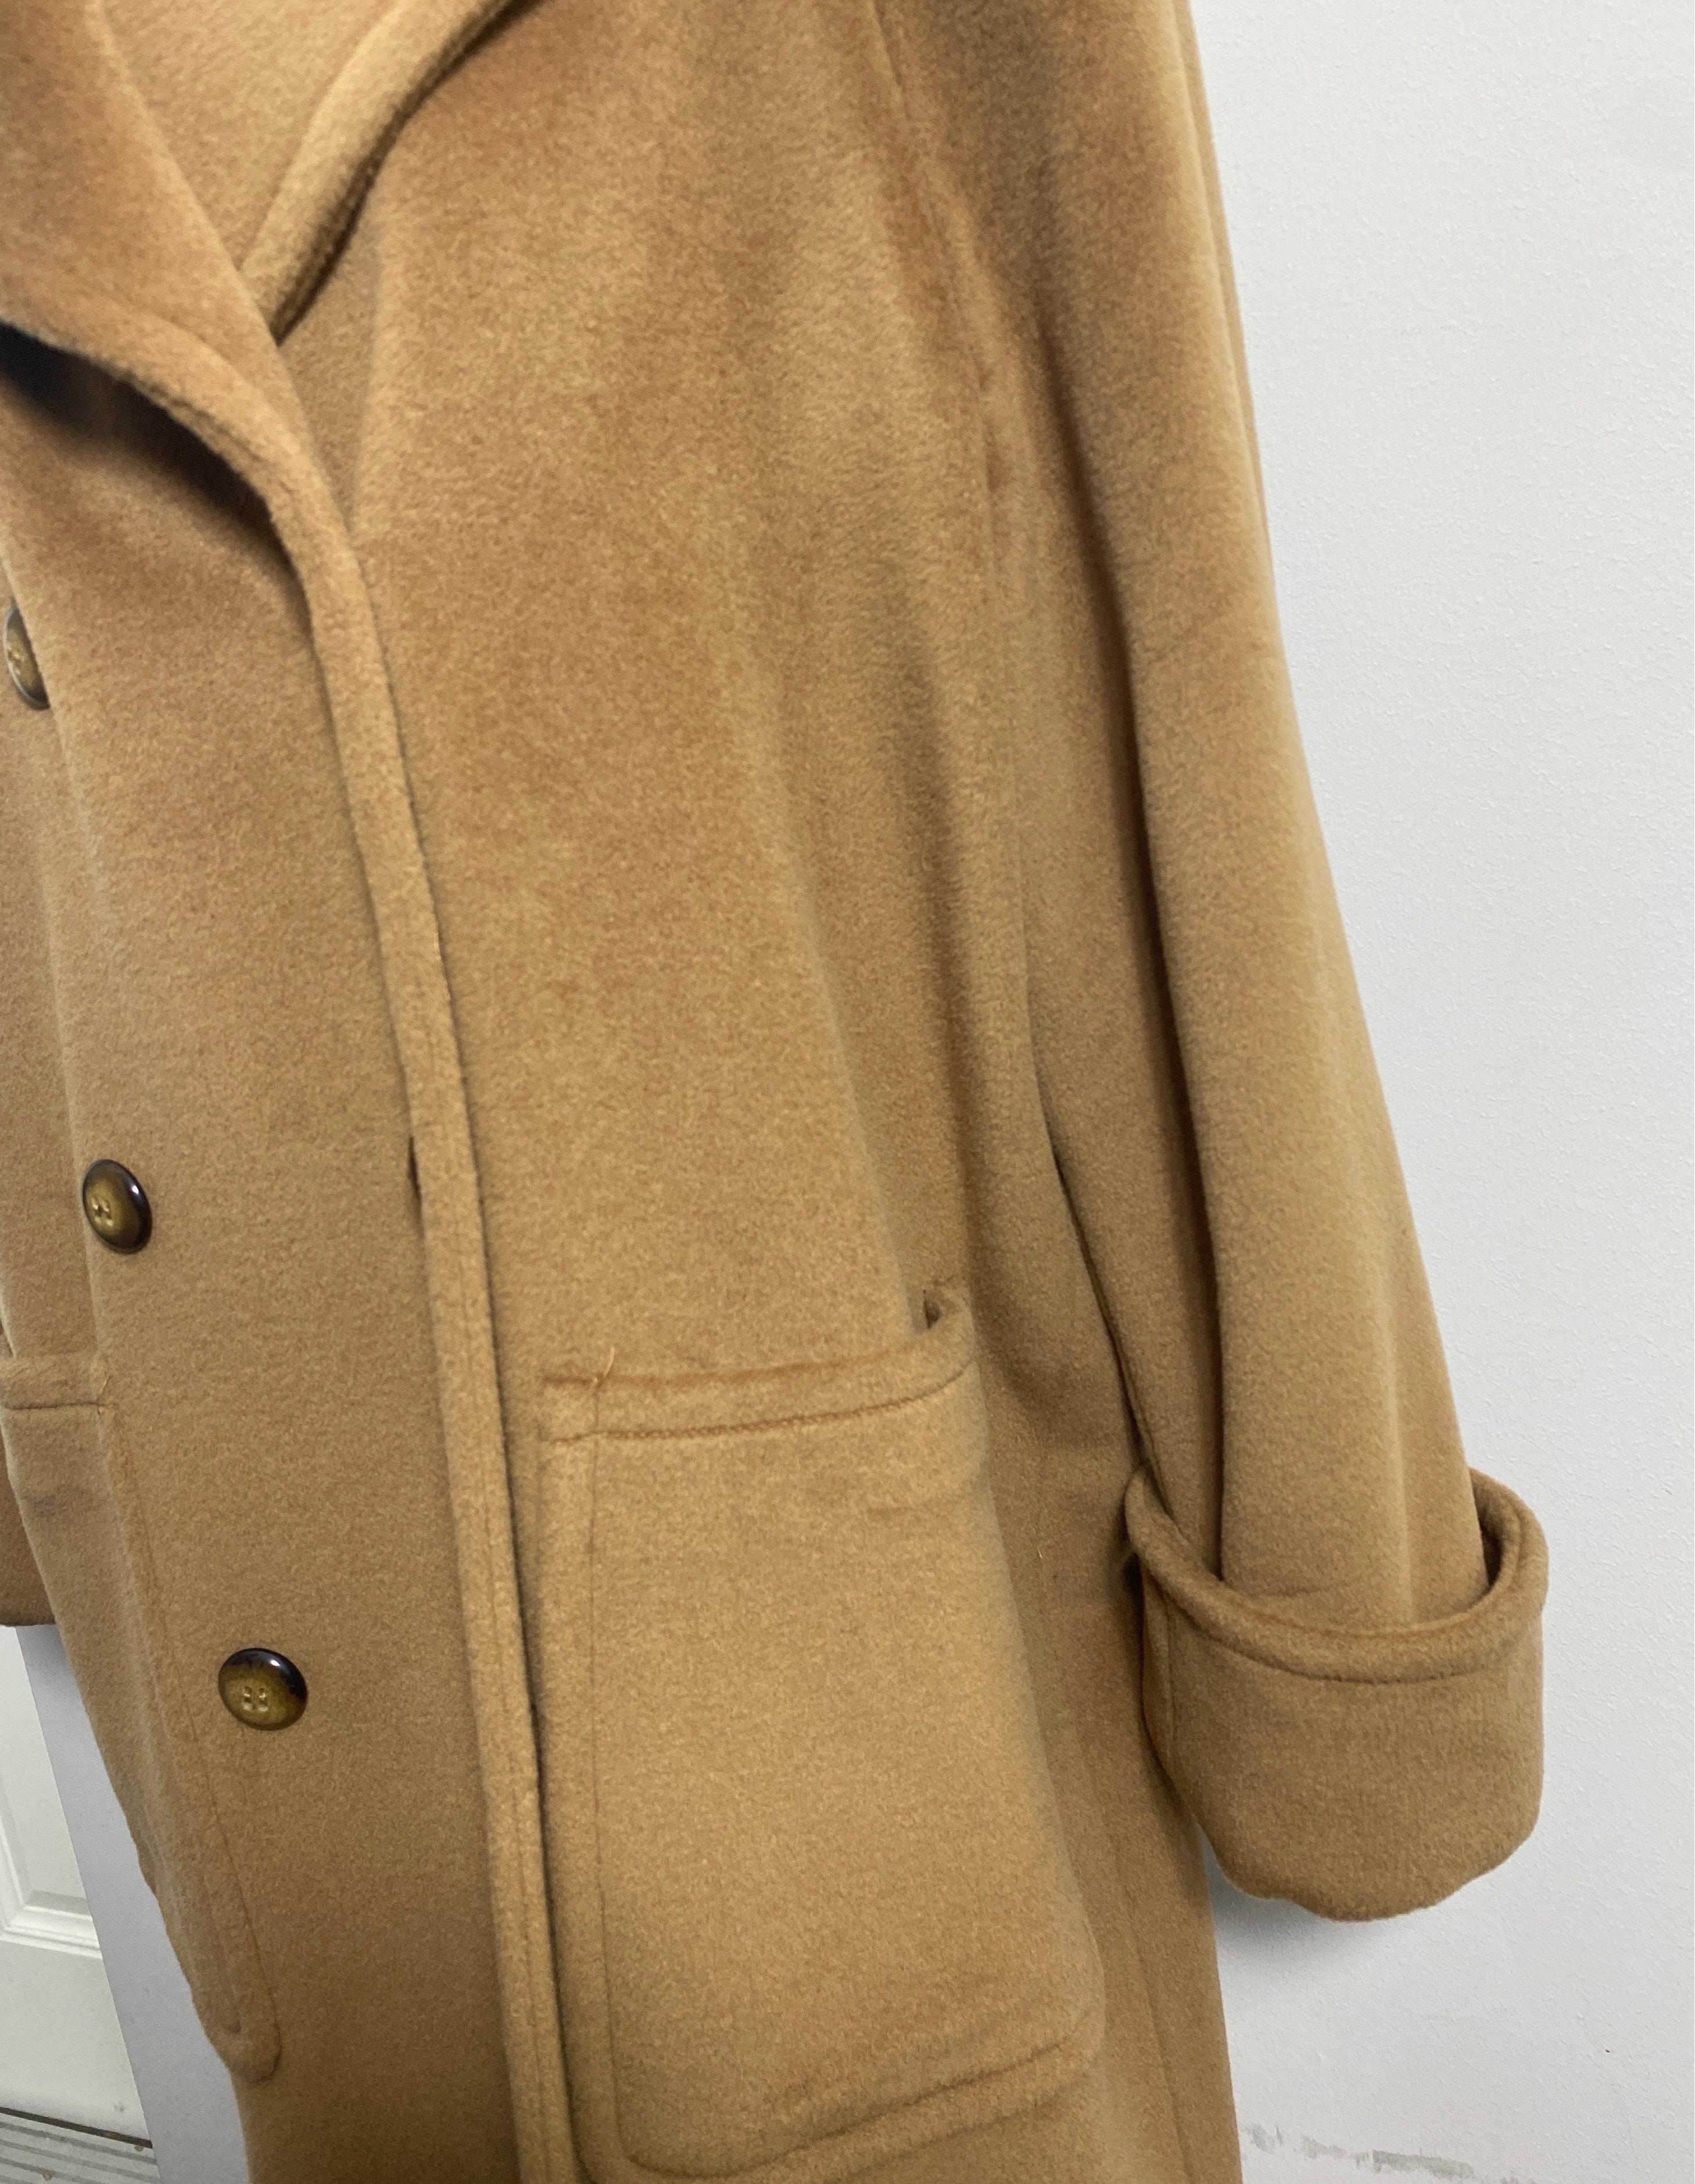 Valentino Boutique 1990’s Double Breasted Tan Cashmere Oversized Coat - Size 10 For Sale 2